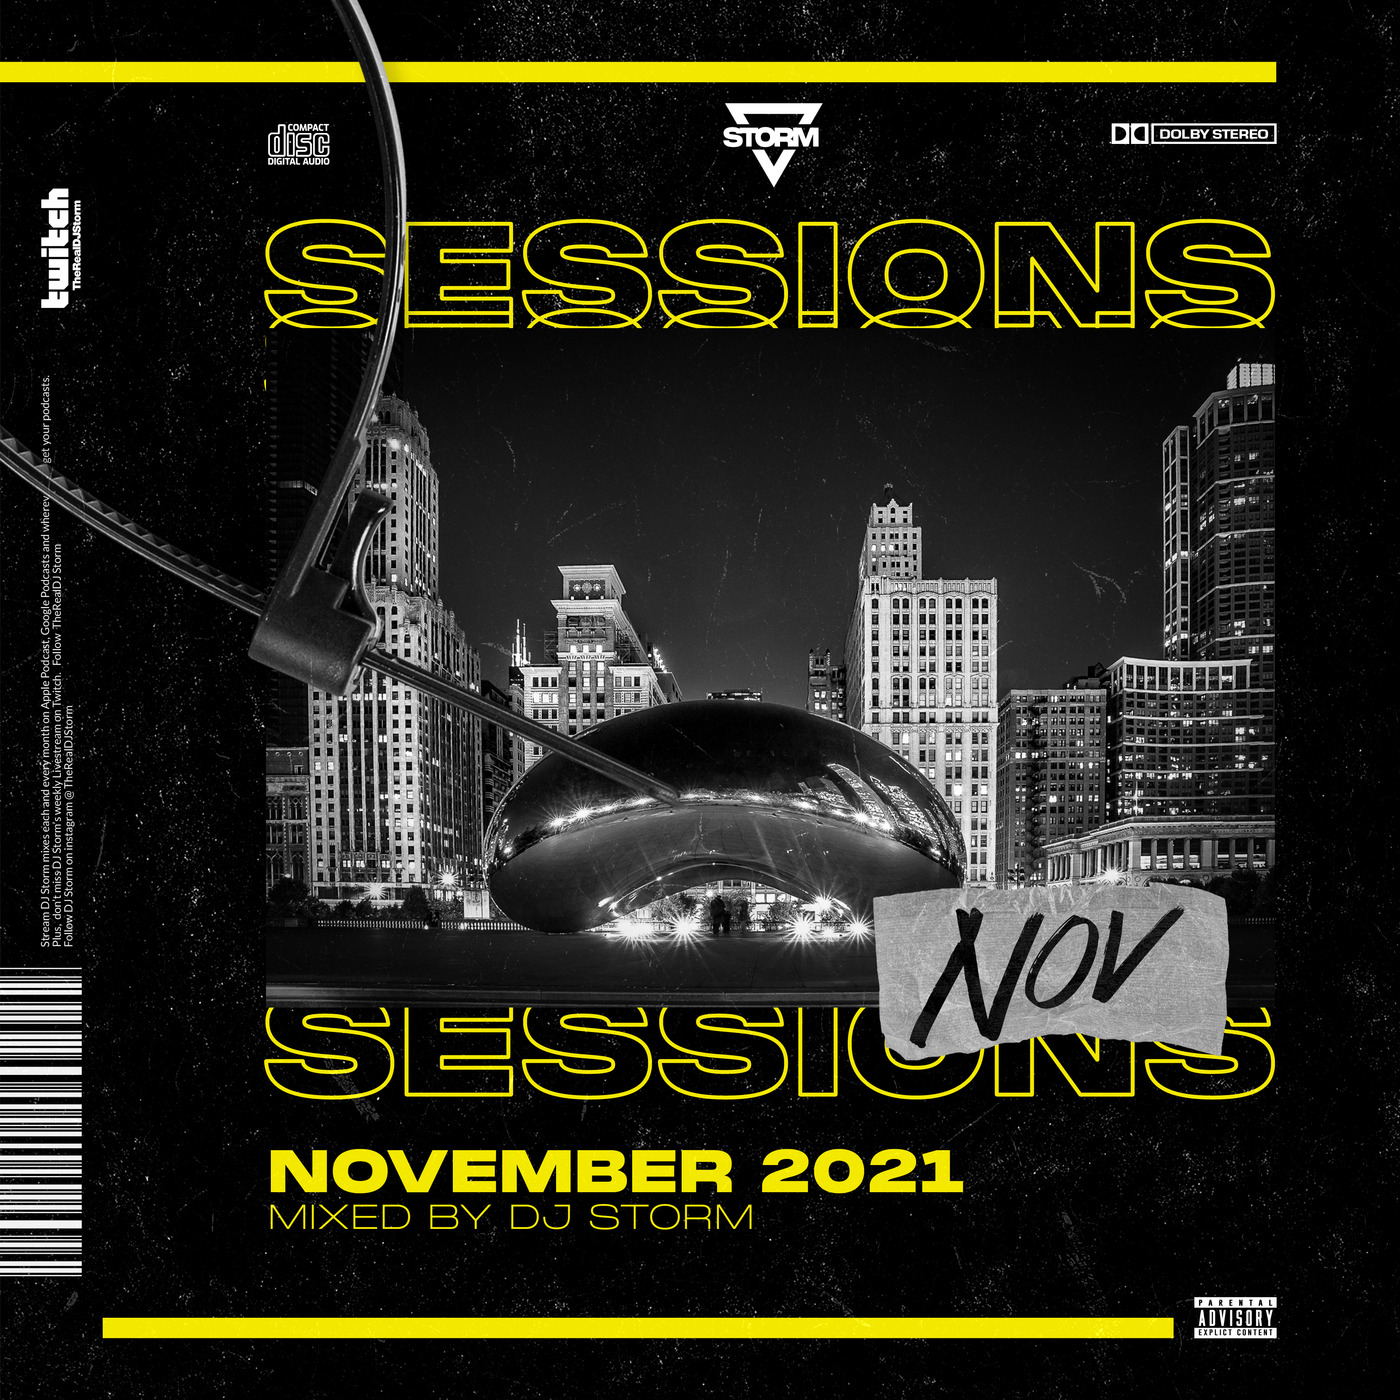 The Sessions: November 2021